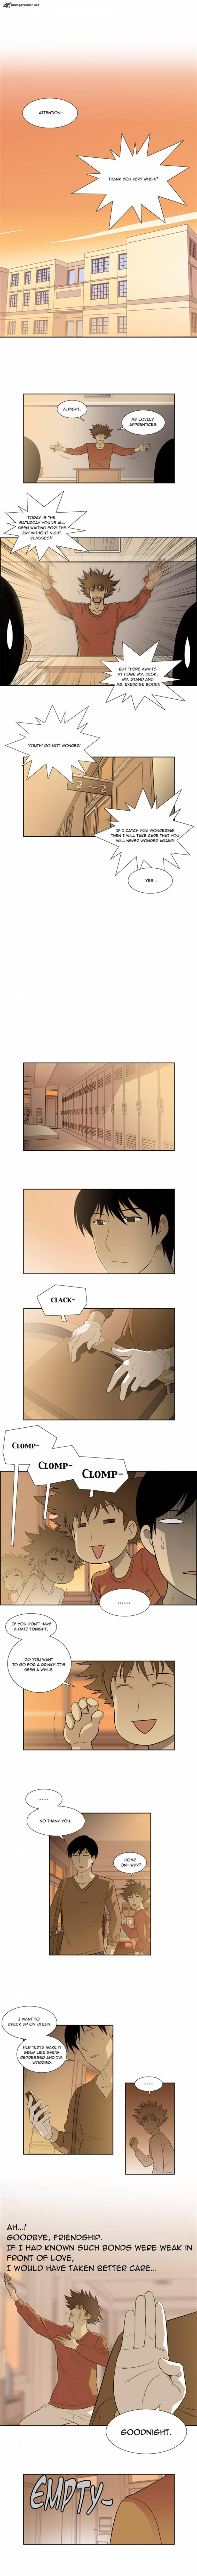 Melo Holic Chapter 39 Page 1